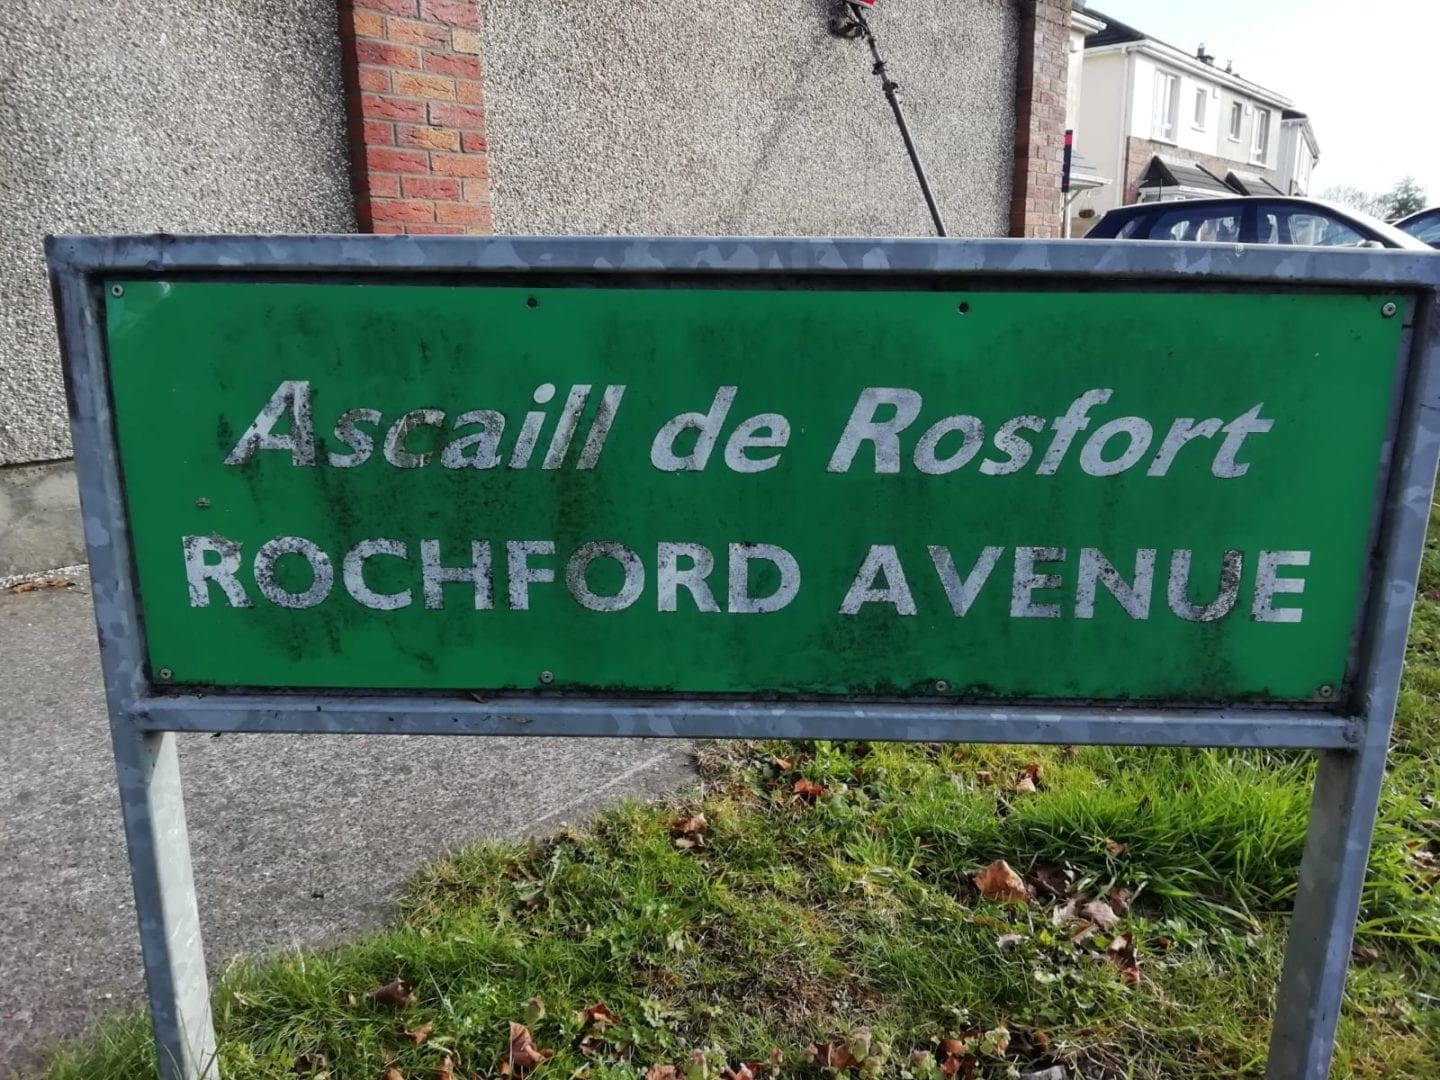 Sign for Rochford Bridge before cleaning covered in grime and dirt